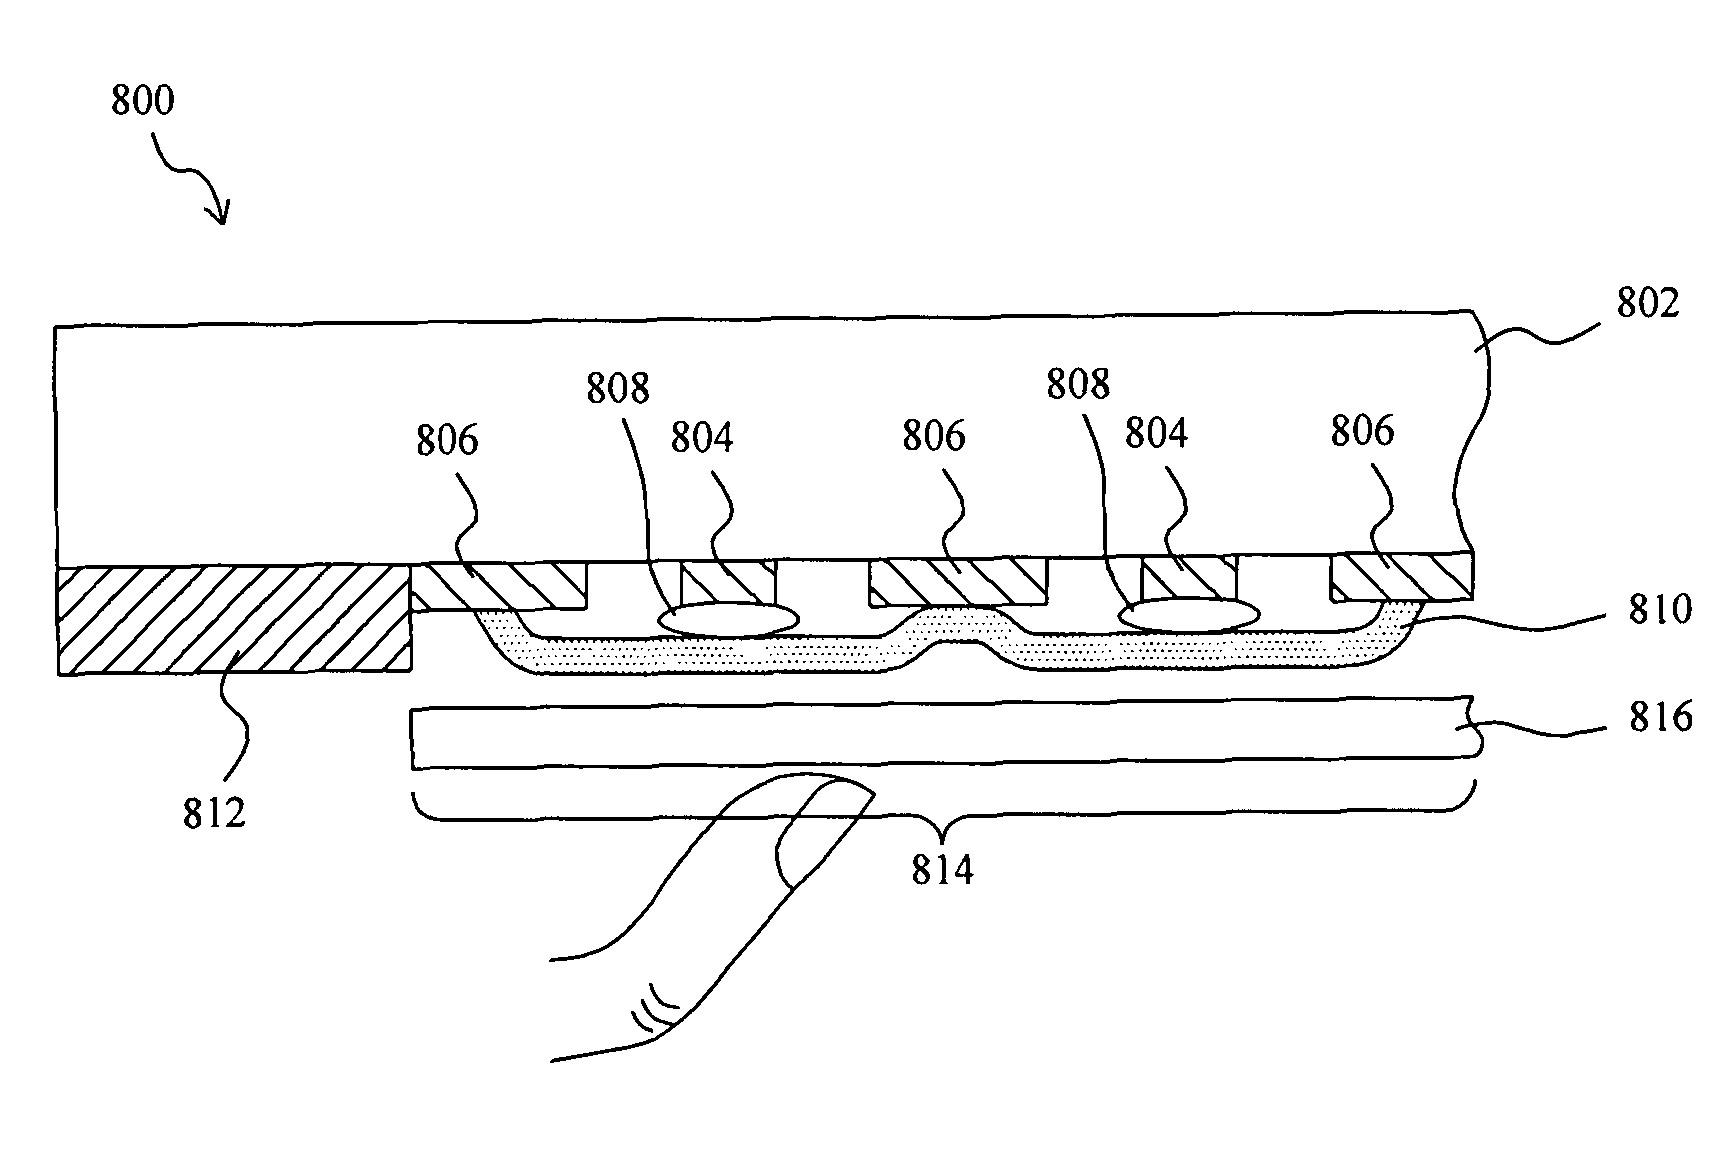 Touchpad with single-layered printed circuit board structure